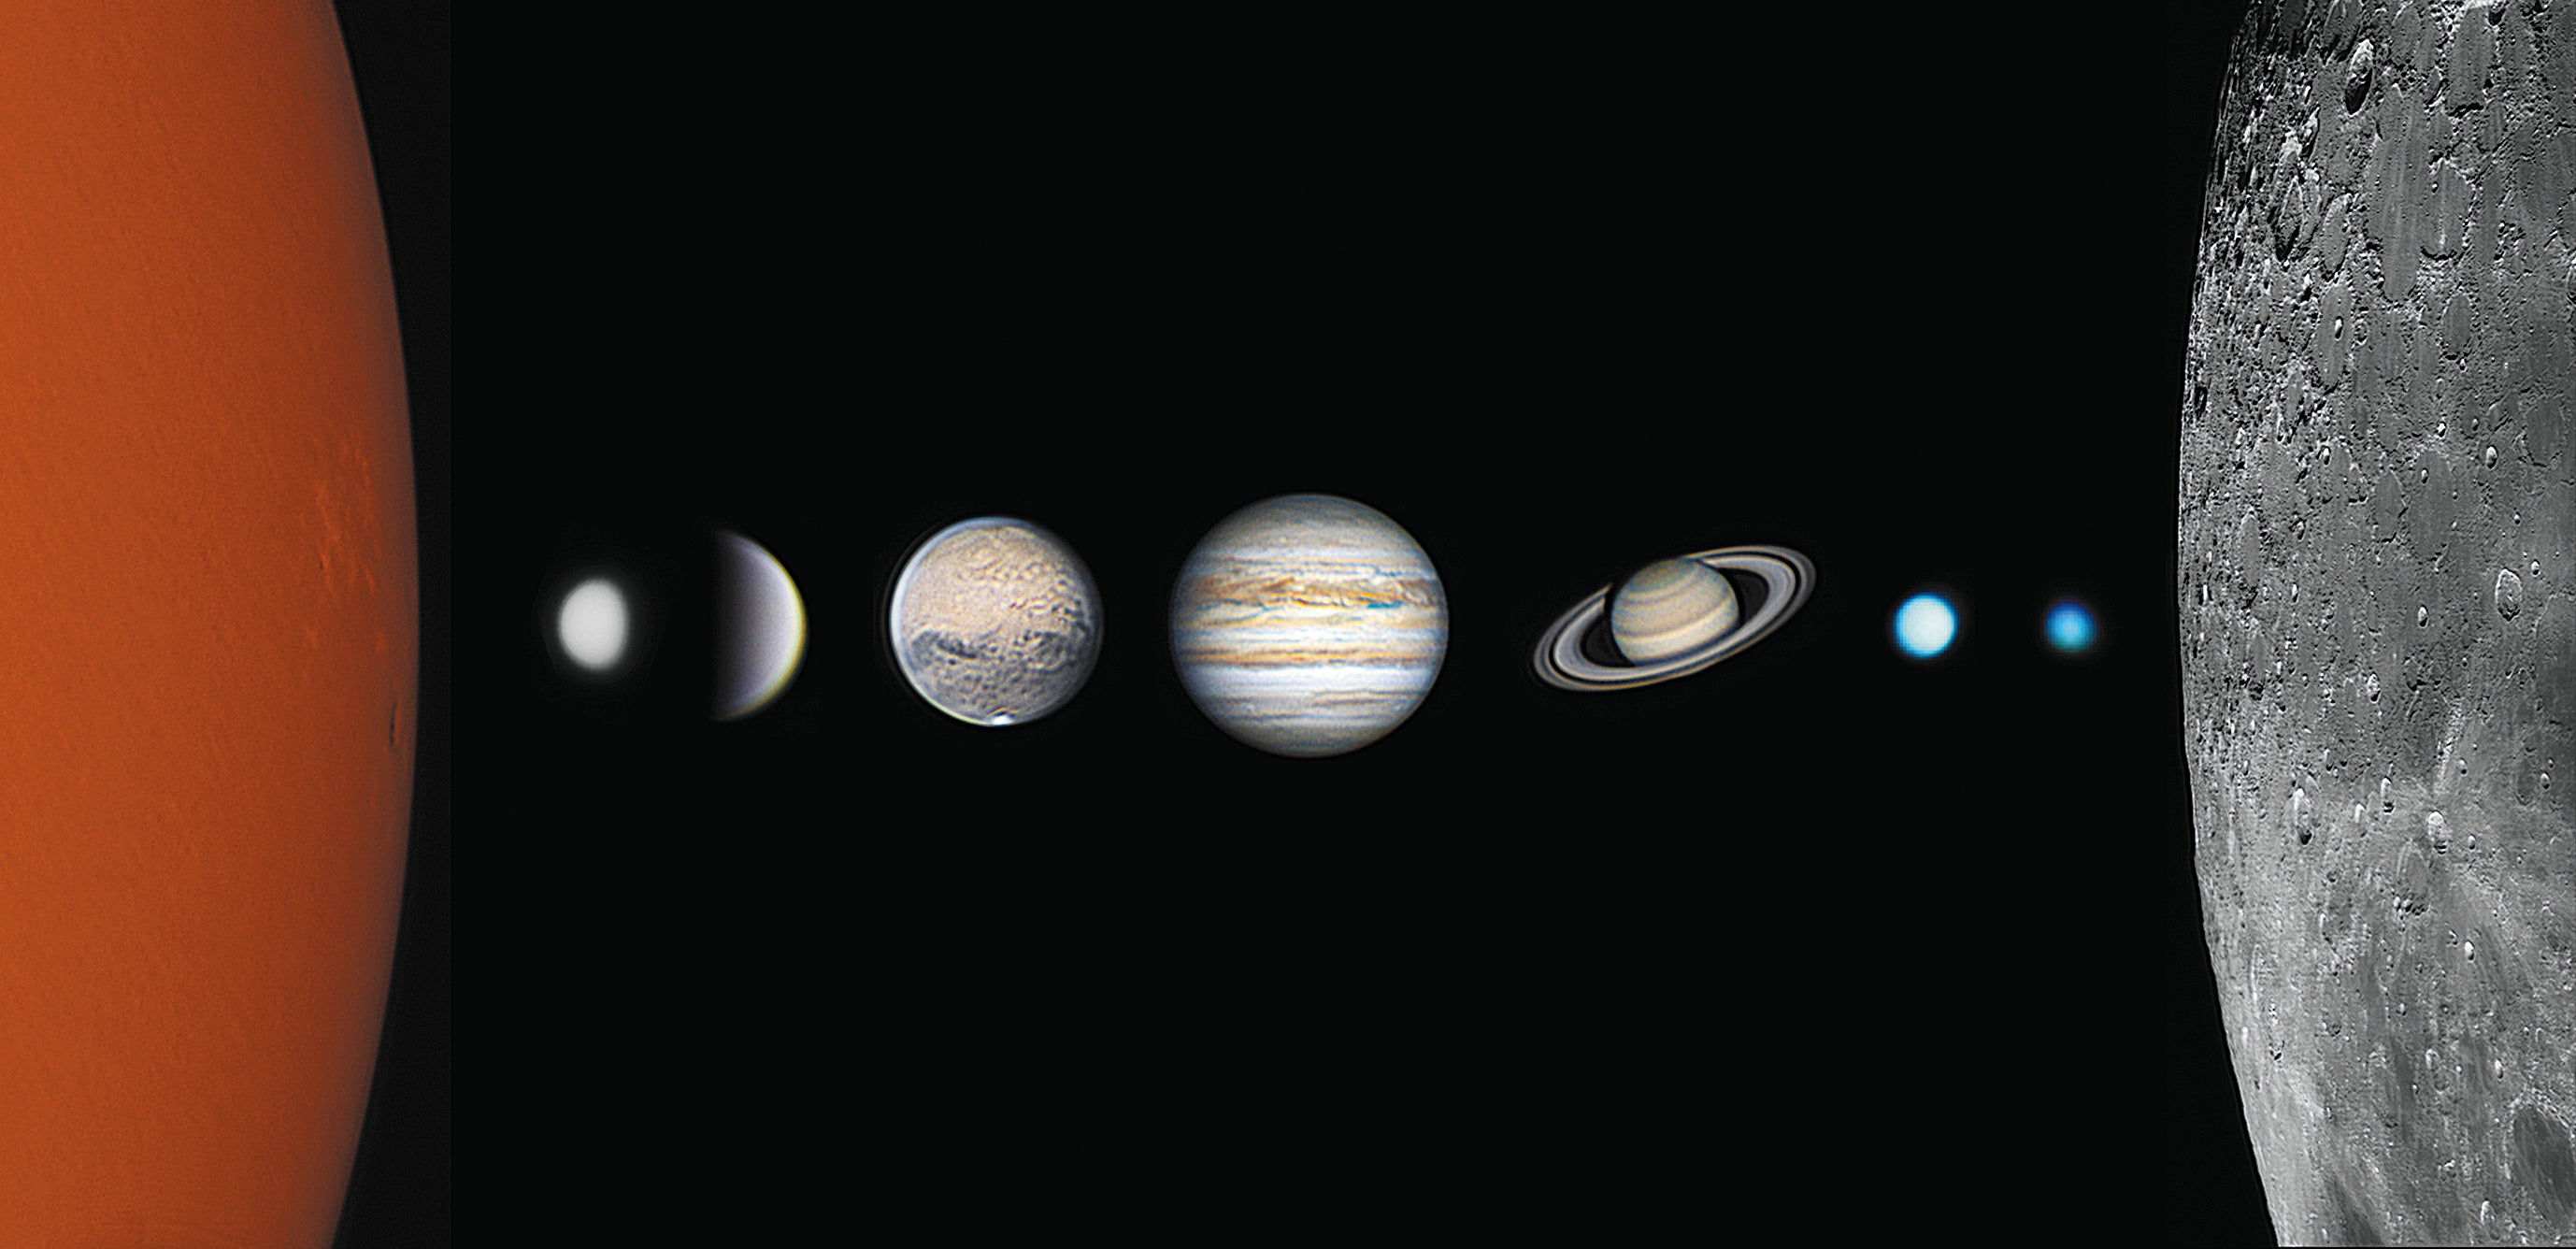 Family Photo of the Solar System won Wang Zhipu the title of “Young Astronomy Photographer of the Year 2021” in the Royal Observatory Greenwich’s annual astrophotography contest